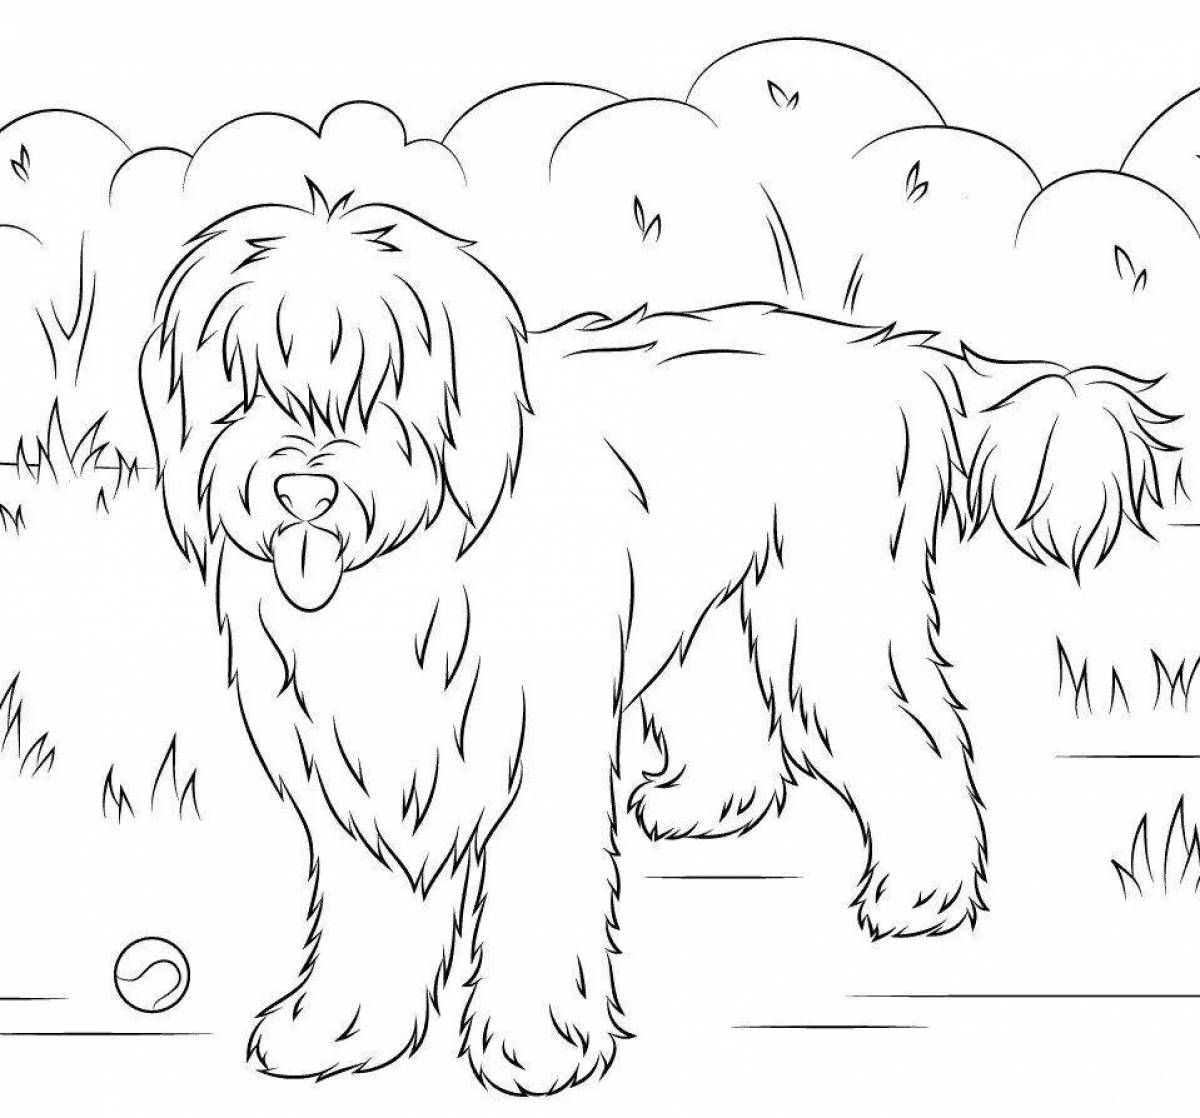 Bright dog coloring page